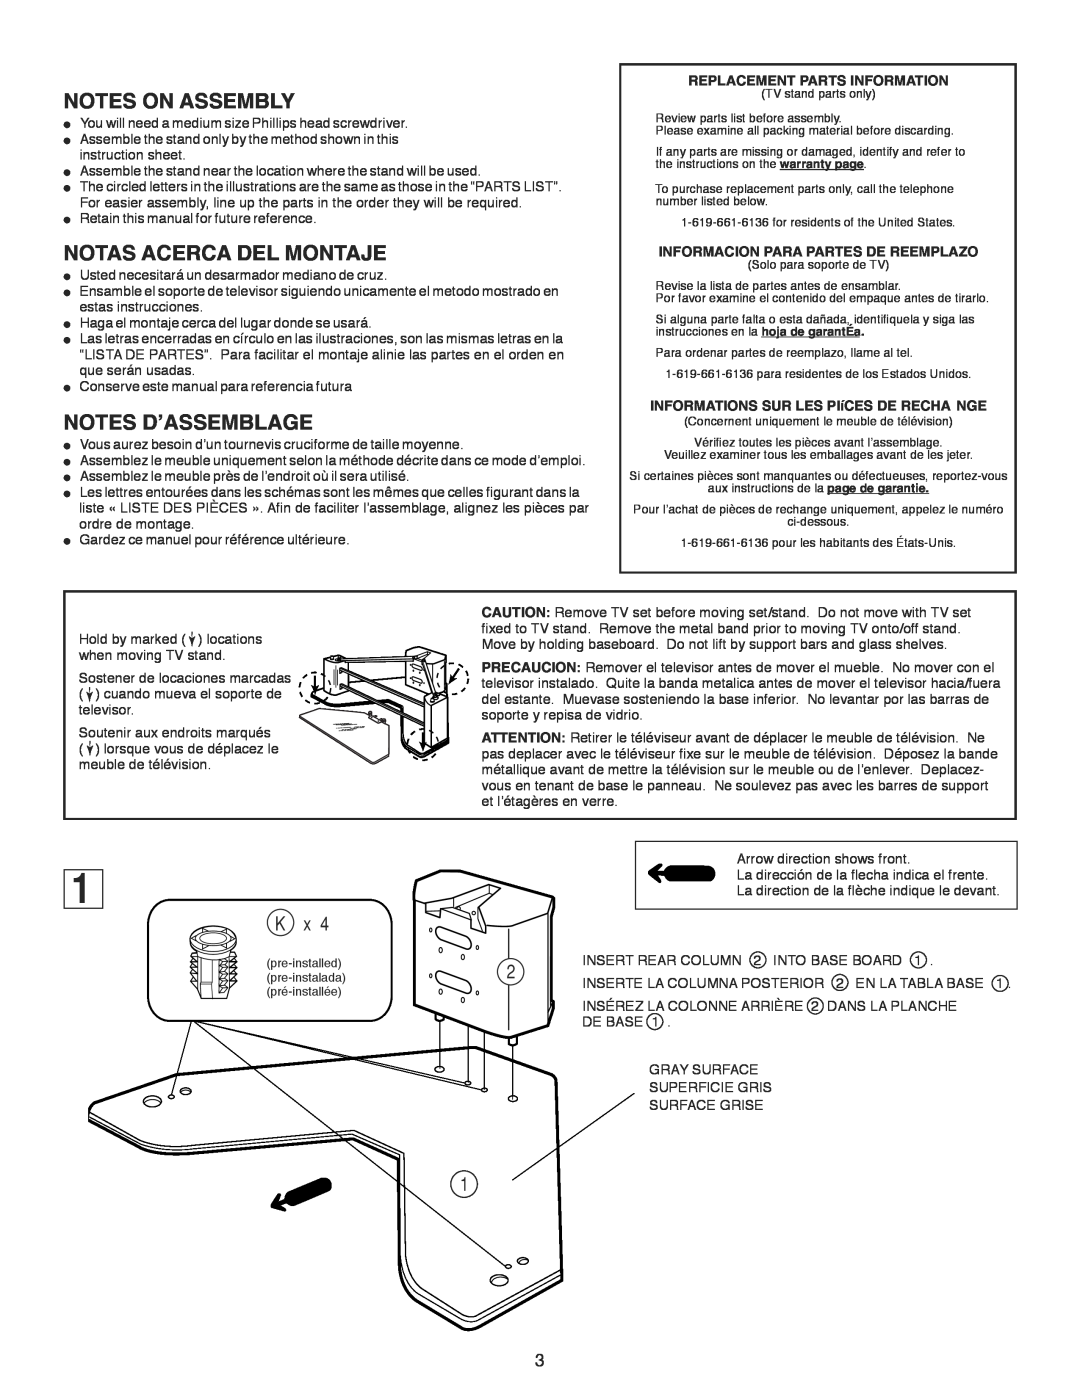 Sony SU-36XBR8 manual Notes On Assembly, Notas Acerca Del Montaje, Notes D’Assemblage, Replacement Parts Information 